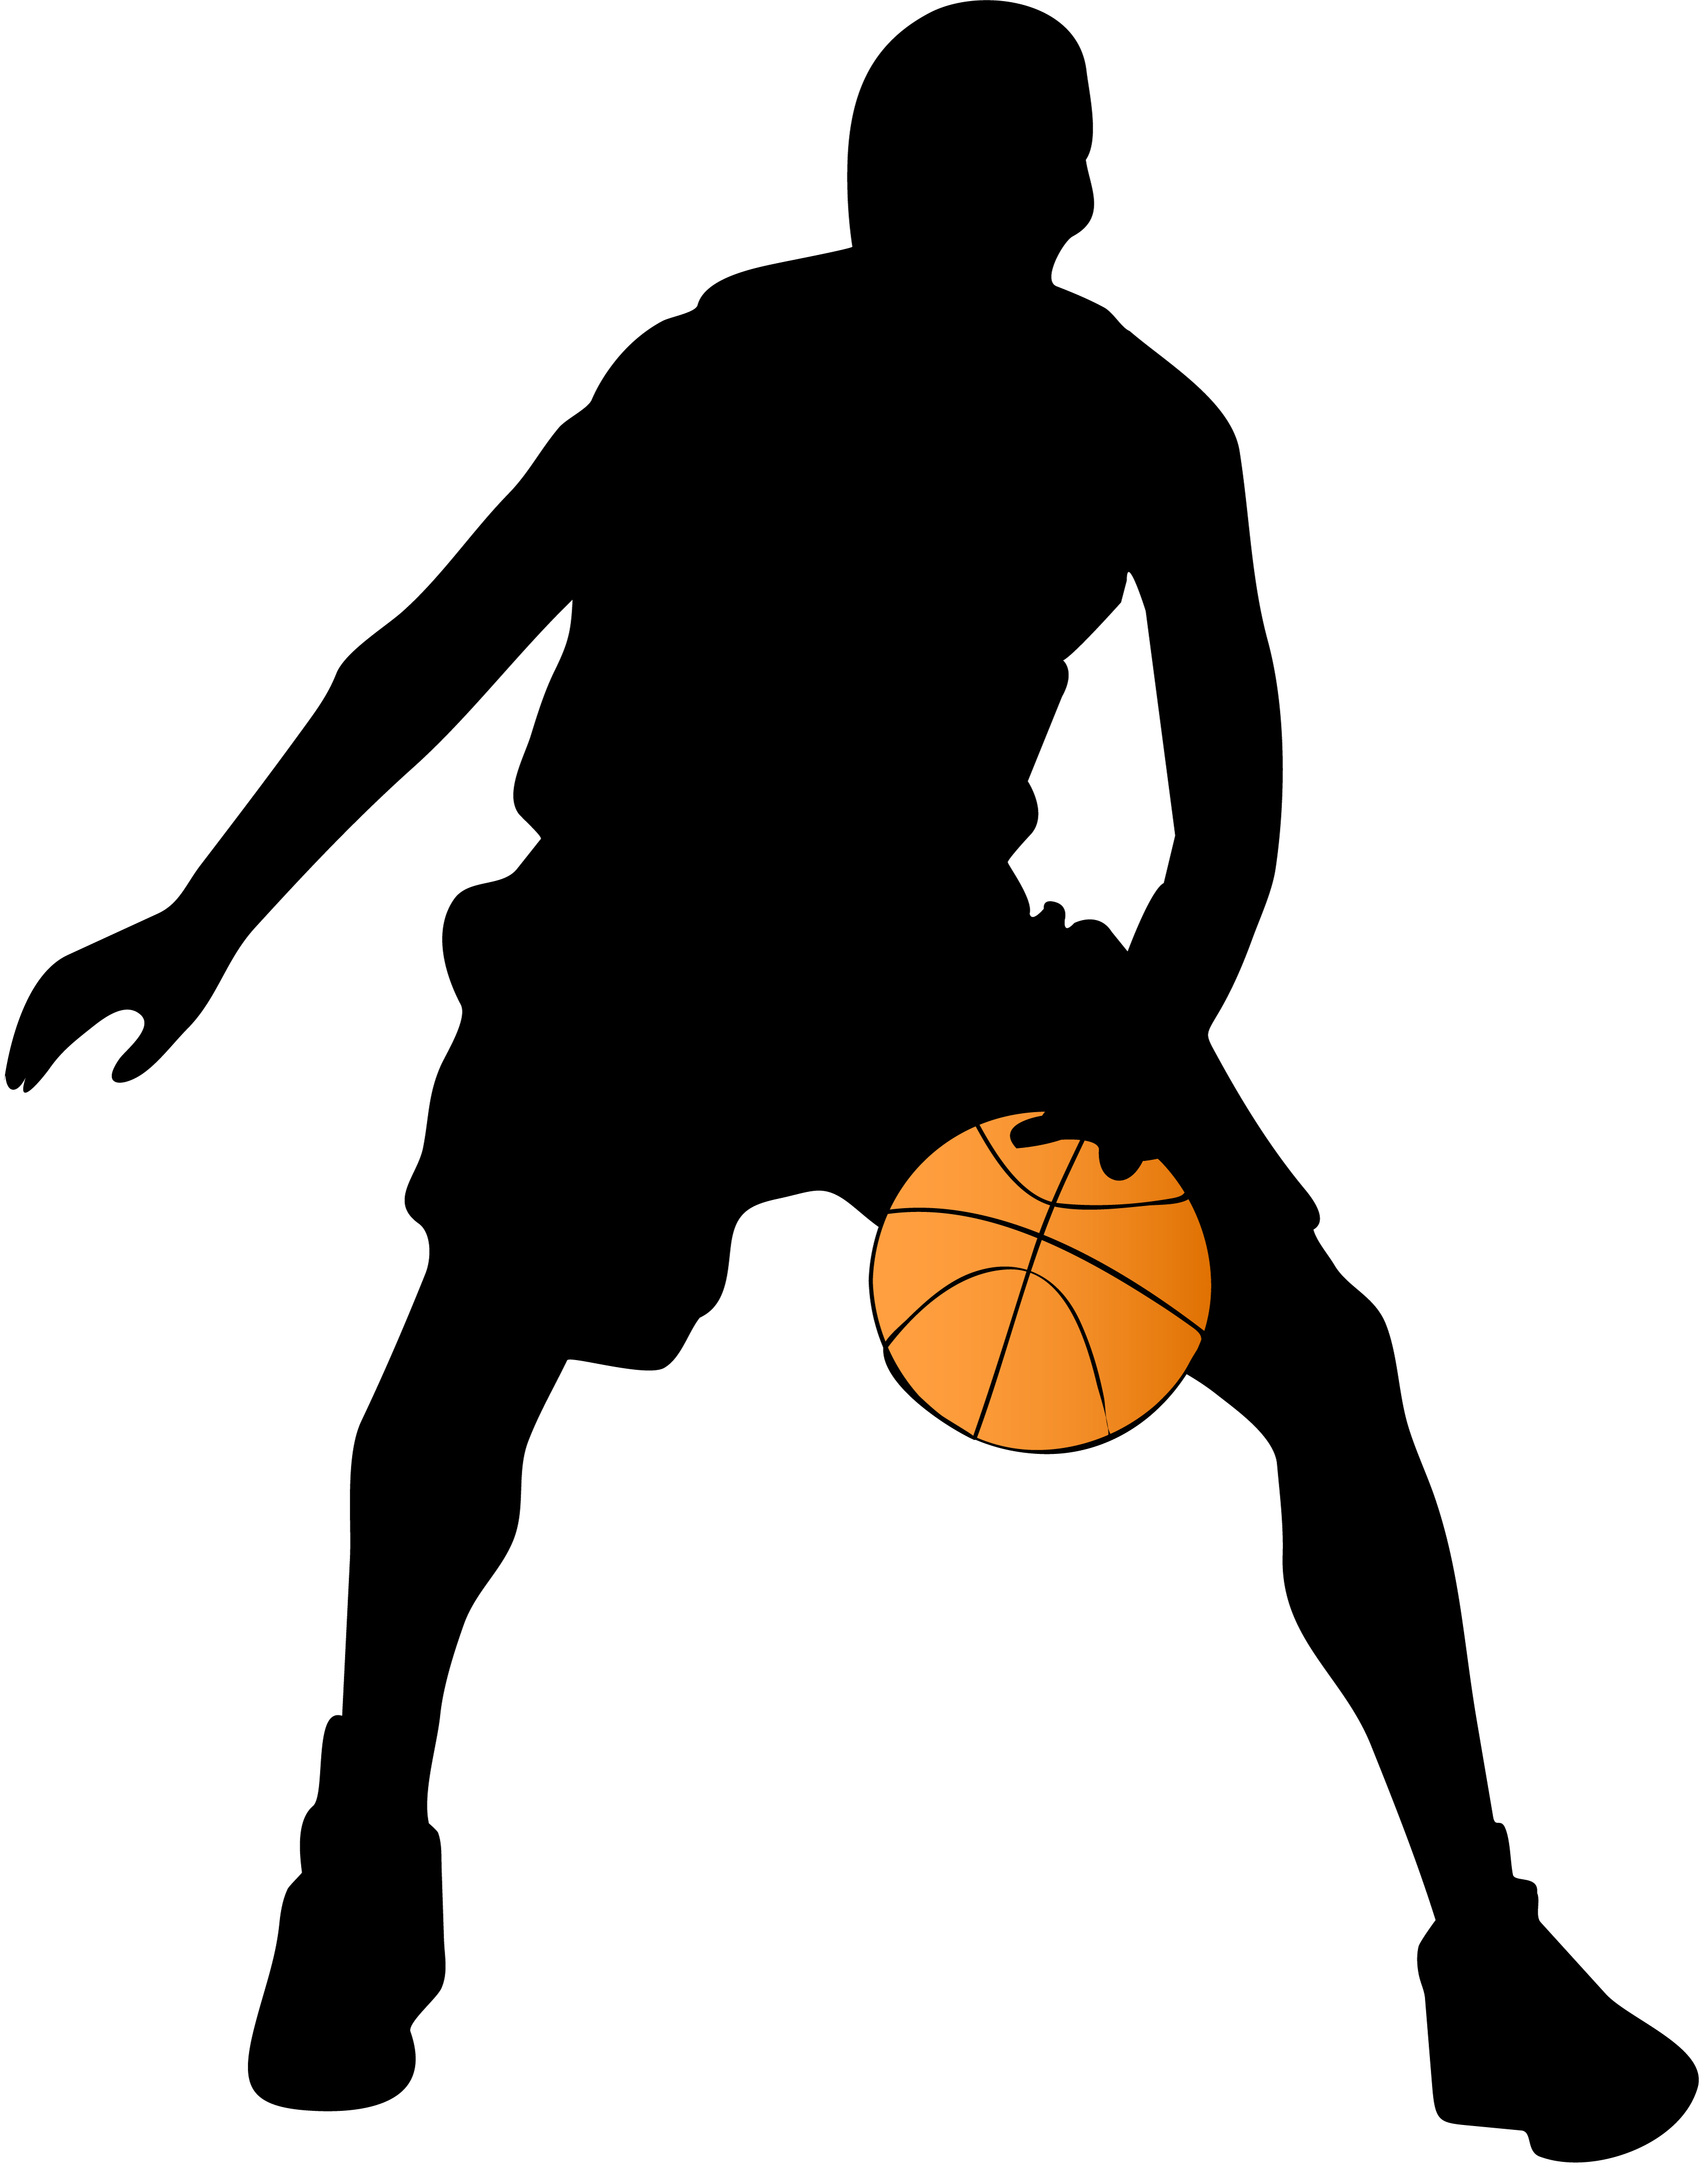 Free Silhouette Basketball Cliparts, Download Free Clip Art.